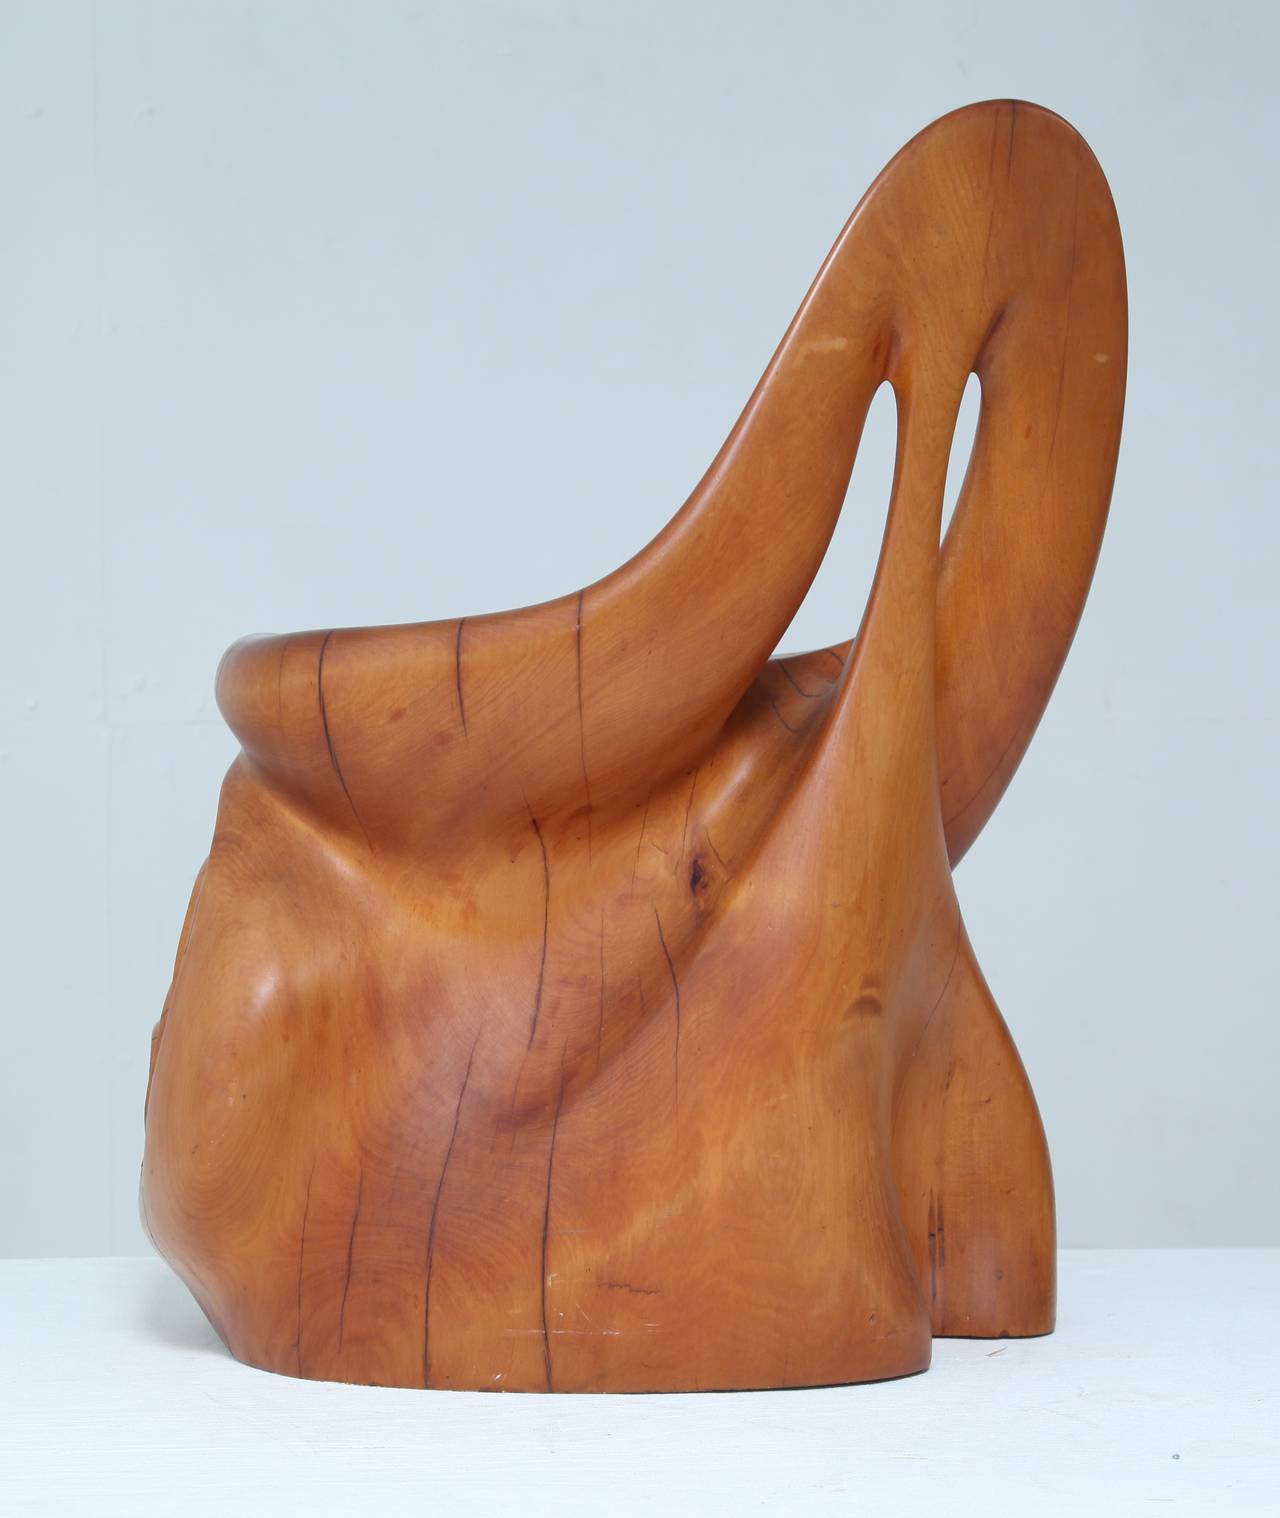 New Zealand Studio Crafted Sculptural Chair For Sale